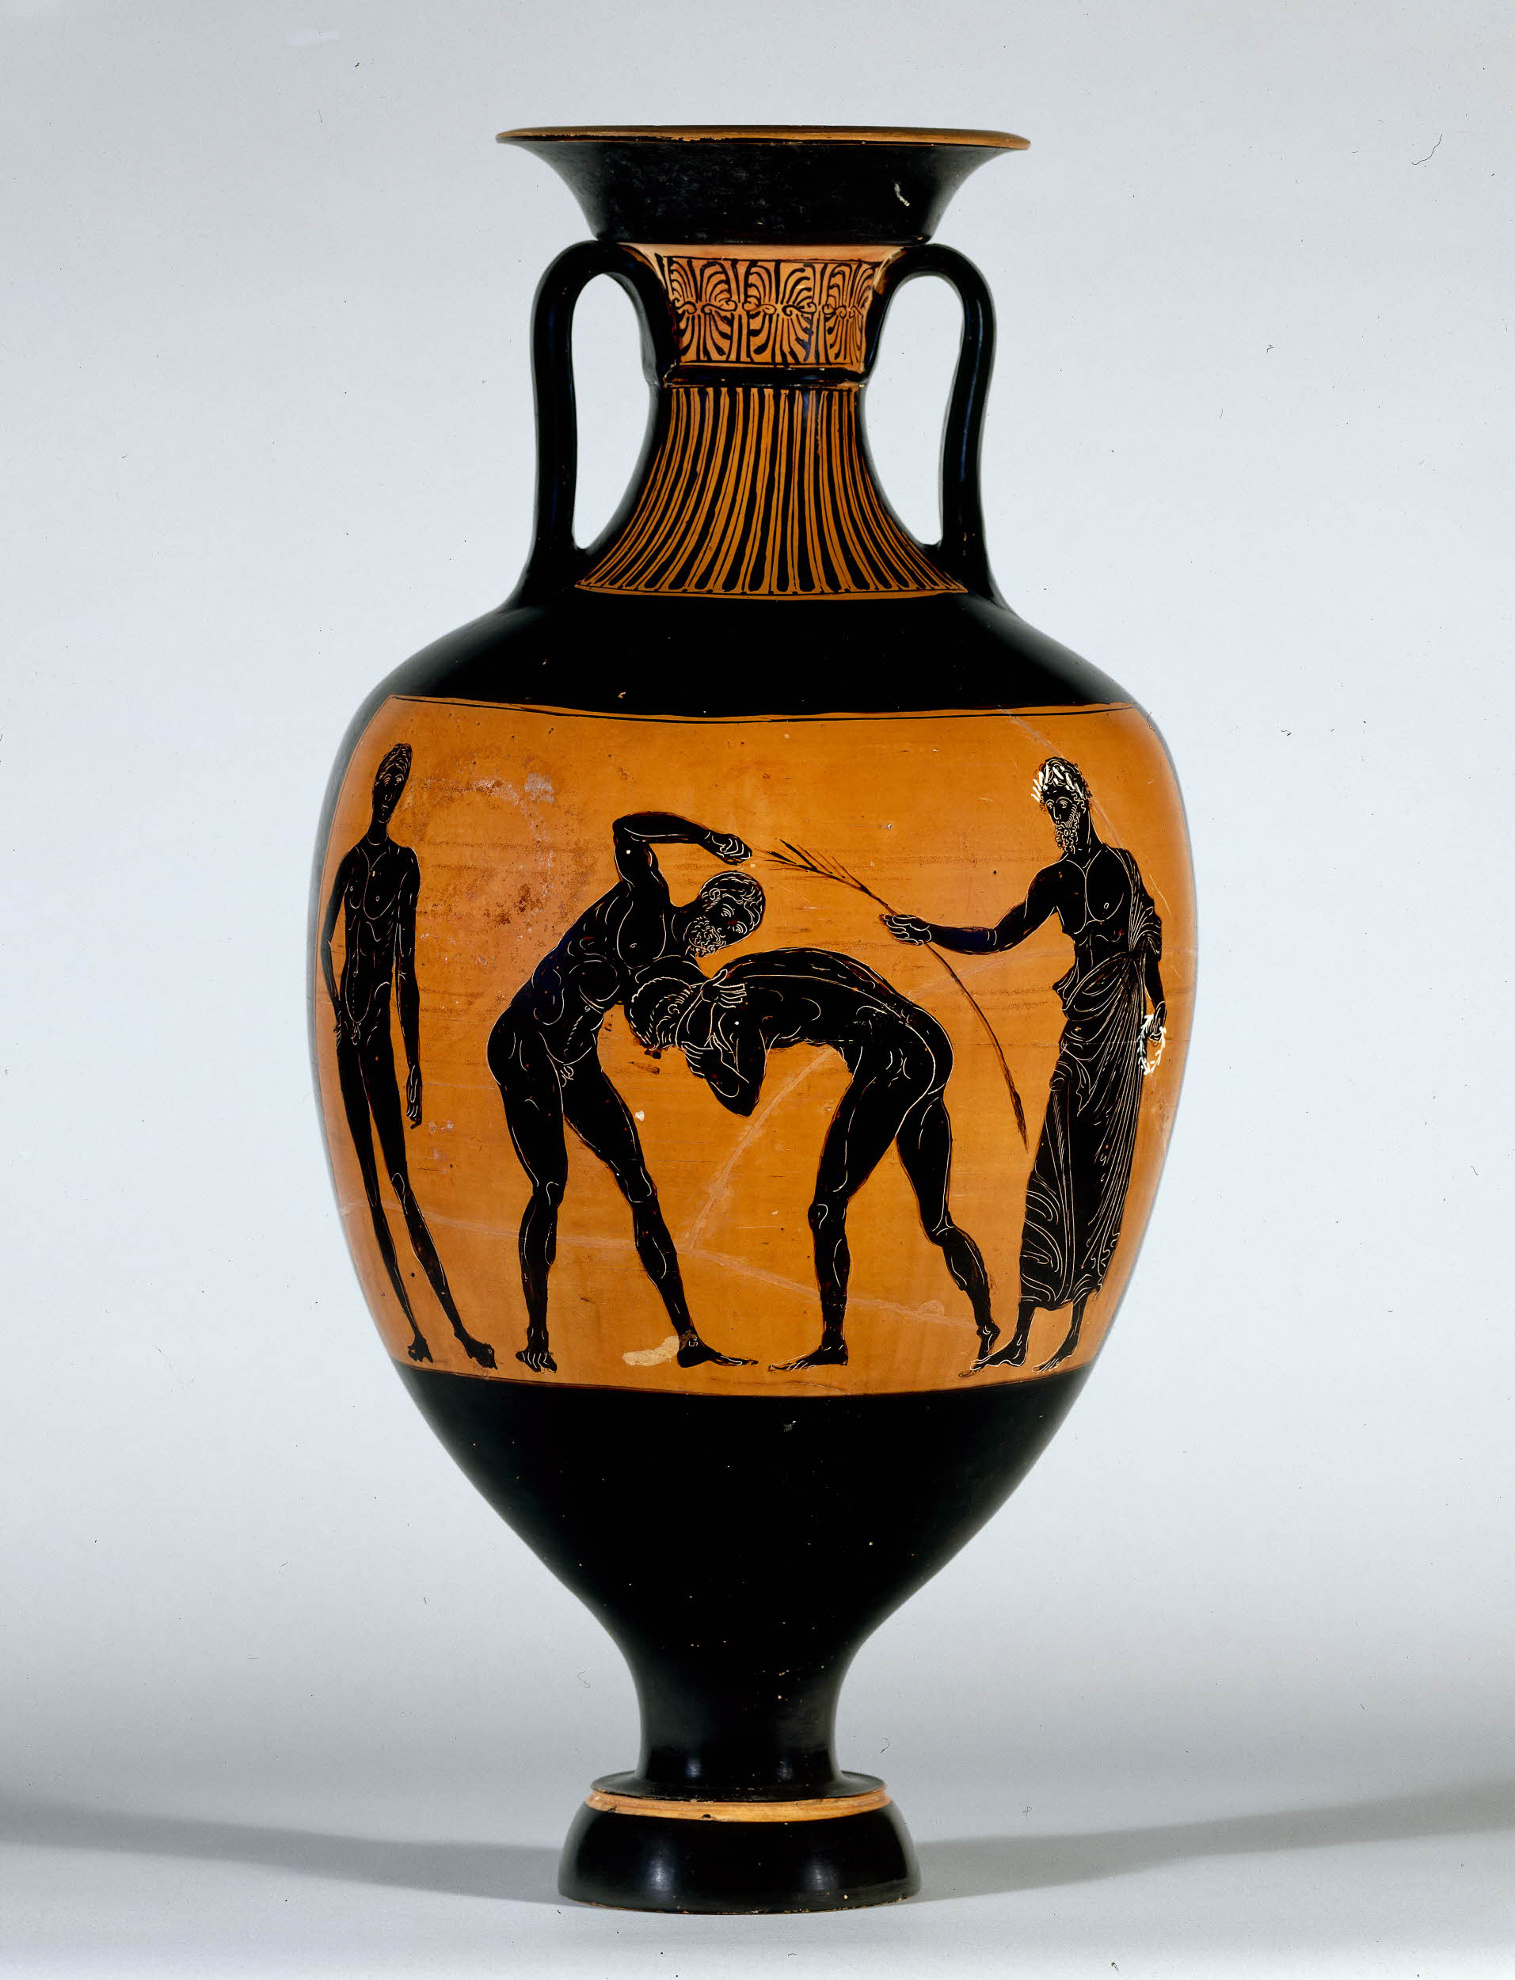 Attische Öl-Amphora als Preis für Sieger in den panathenäischen Spielen, 332/1 v. Chr., Ton, Höhe des Objektes 77 cm, London, The British Museum Inv.-Nr. 1873,0820.370.<br>
Quelle: <a href="http://www.britishmuseum.org/research/collection_online/collection_object_details.aspx?objectId=398906&partId=1">Trustees of the British Museum</a><br>Lizenz: <a href="https://creativecommons.org/licenses/by-nc-sa/4.0/deed.de">Creative Commons BY-NC-SA 4.0</a>